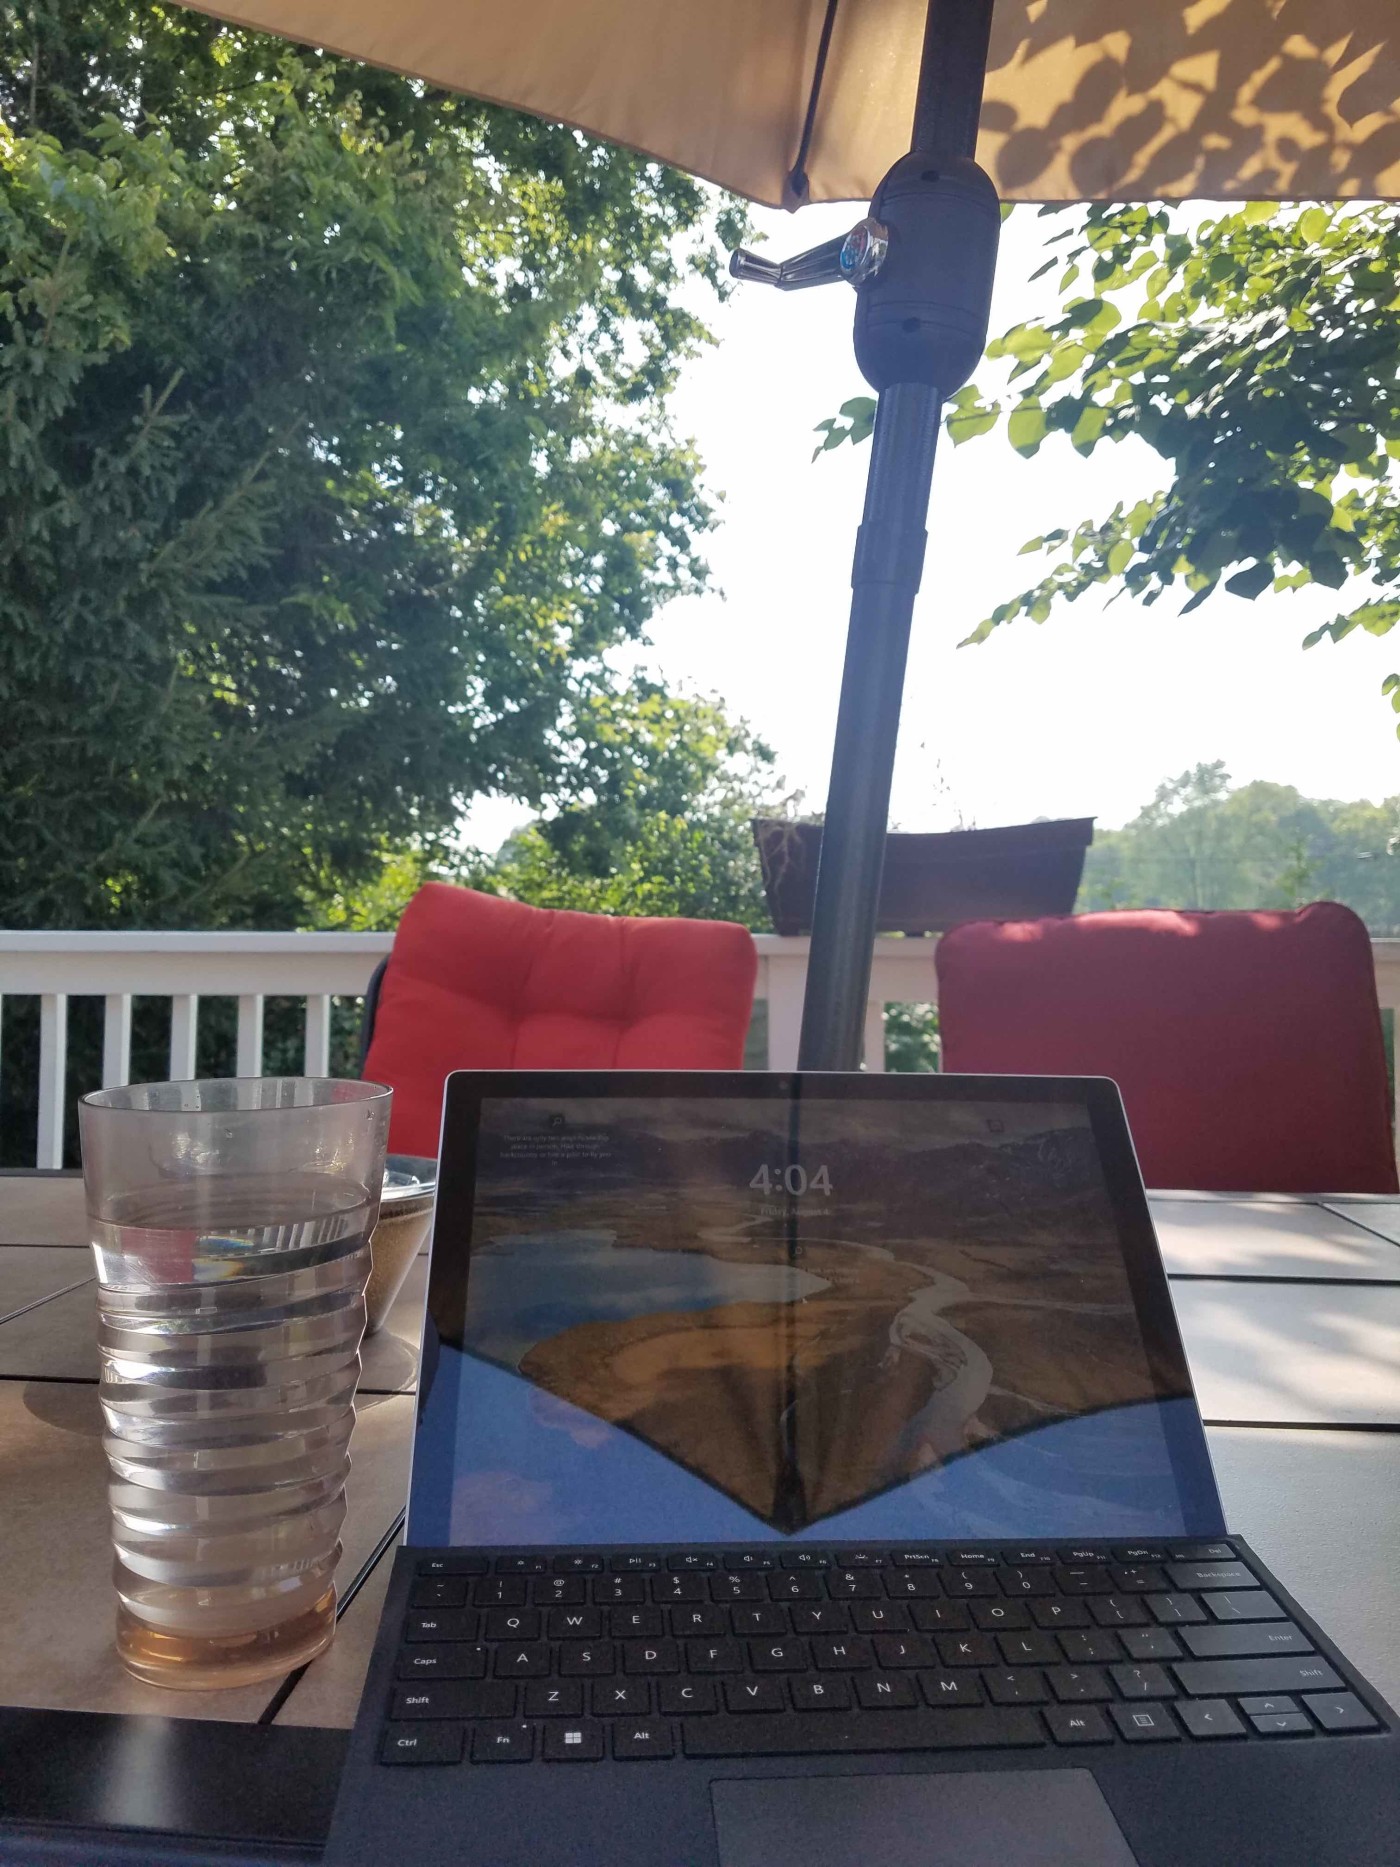 A picture of Leanna's outdoor work setup